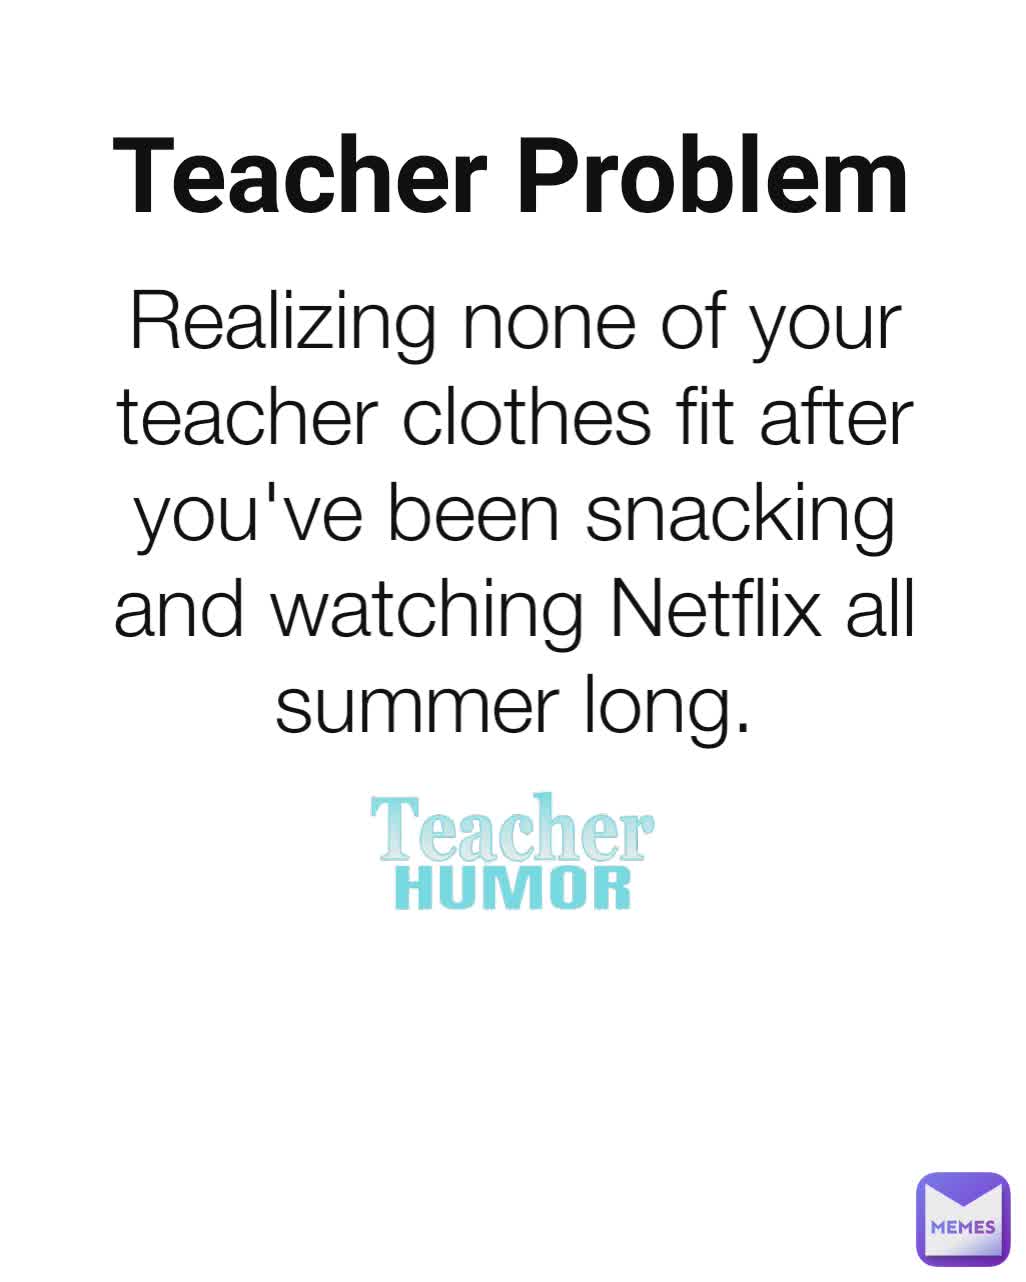 Realizing none of your teacher clothes fit after you've been snacking and watching Netflix all summer long. Teacher Problem